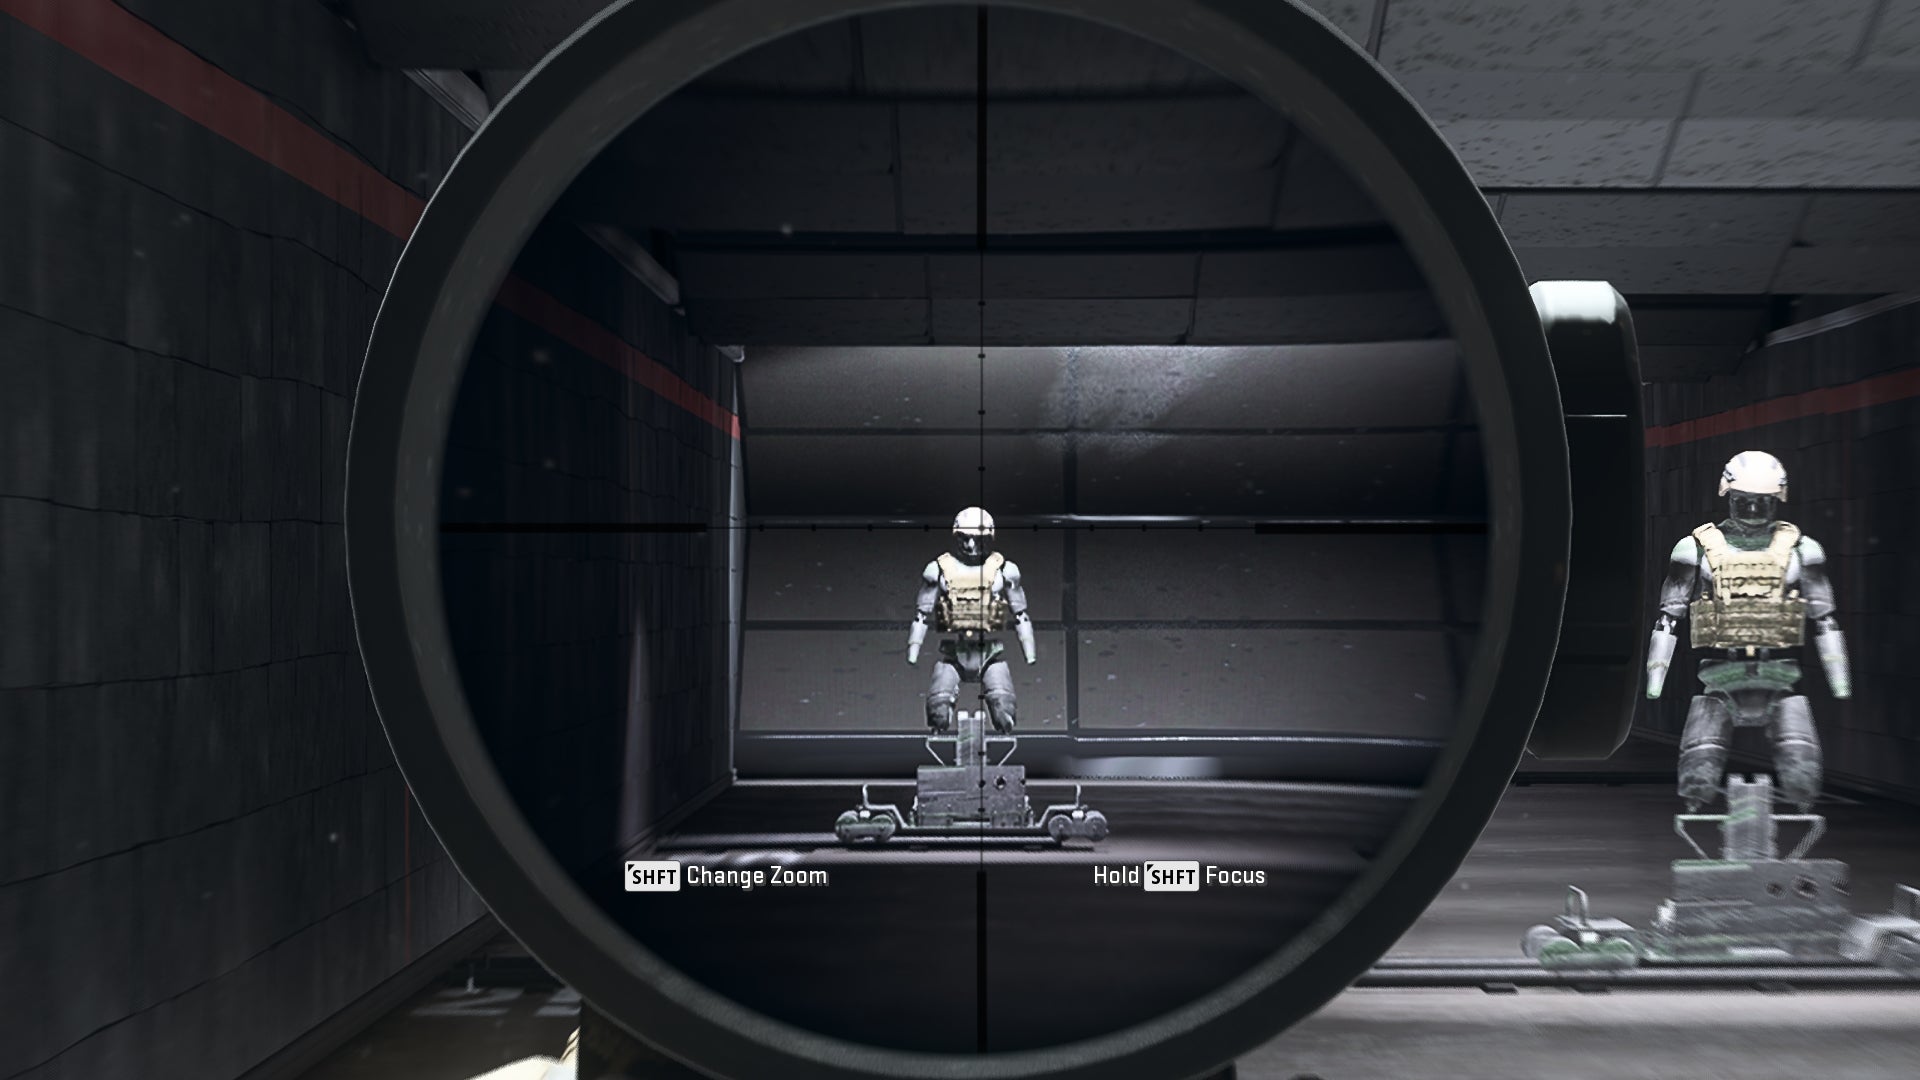 The player in Warzone 2.0 aims at a training dummy using the SP-X 80 6.6x optic attachment.